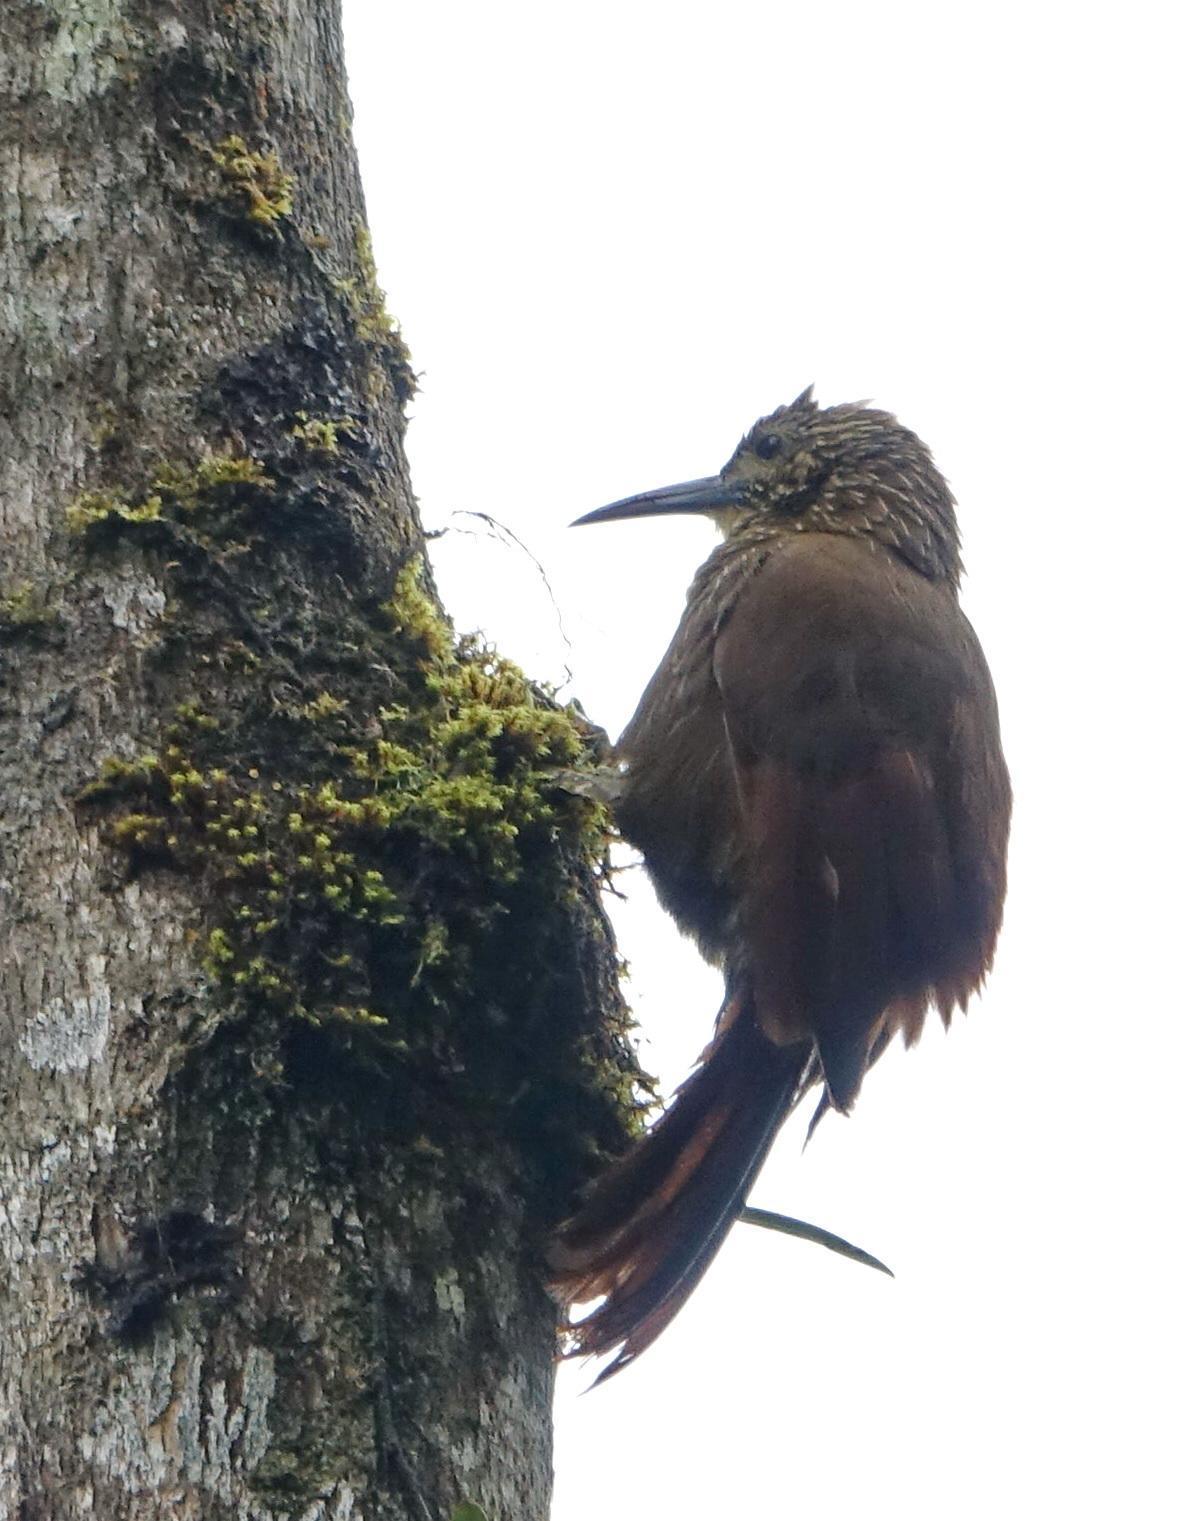 Strong-billed Woodcreeper Photo by Doug Swartz